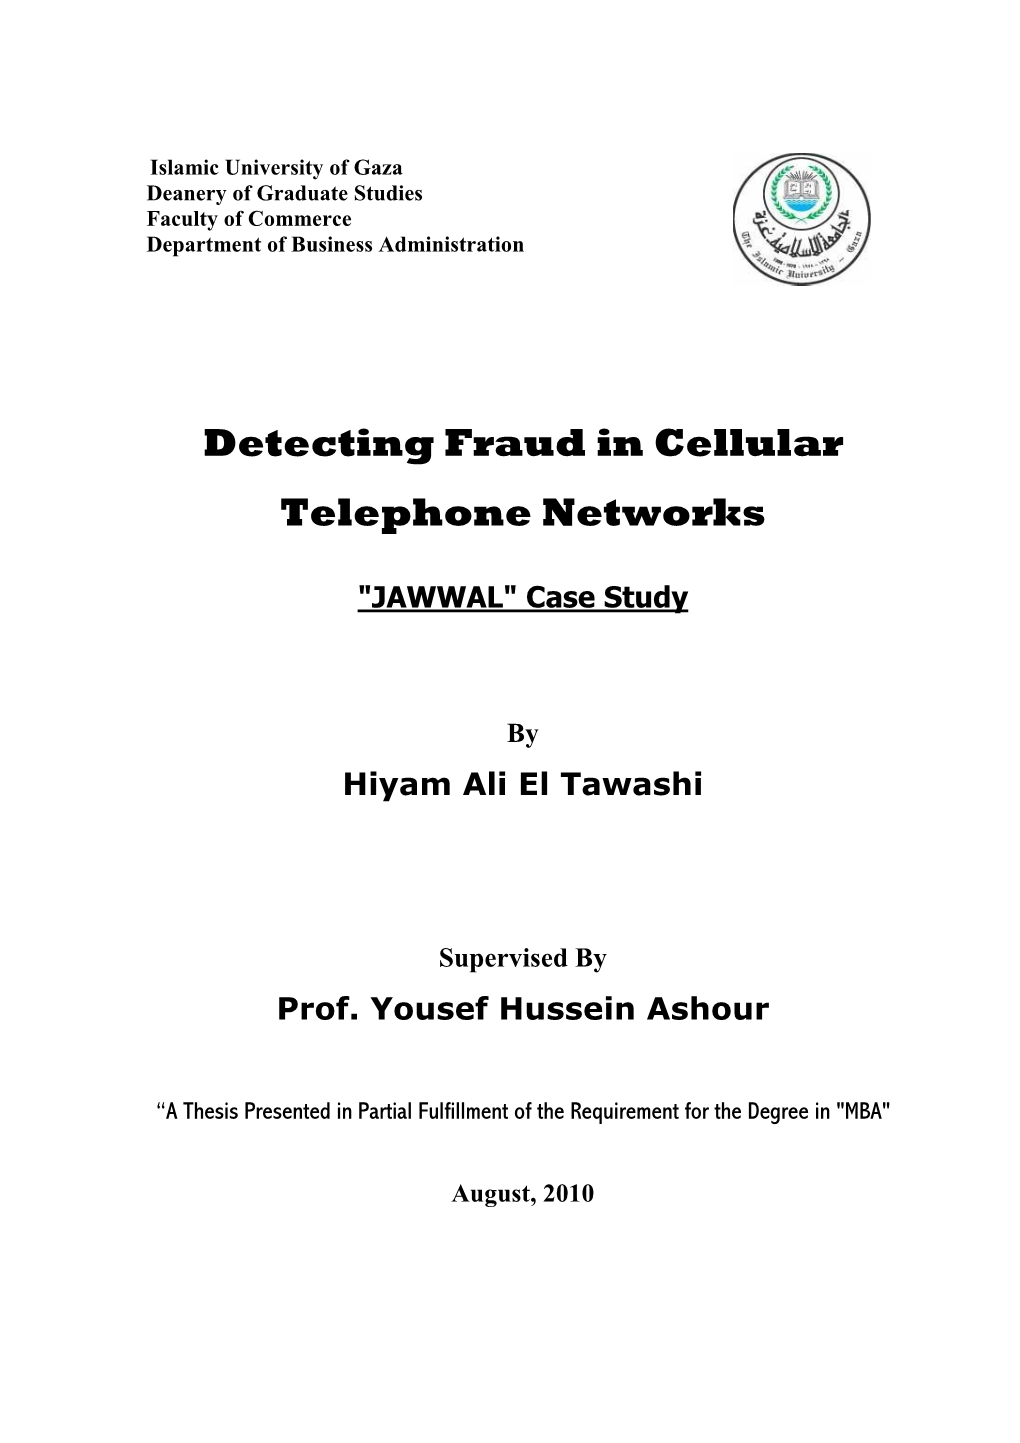 Detecting Fraud in Cellular Telephone Networks